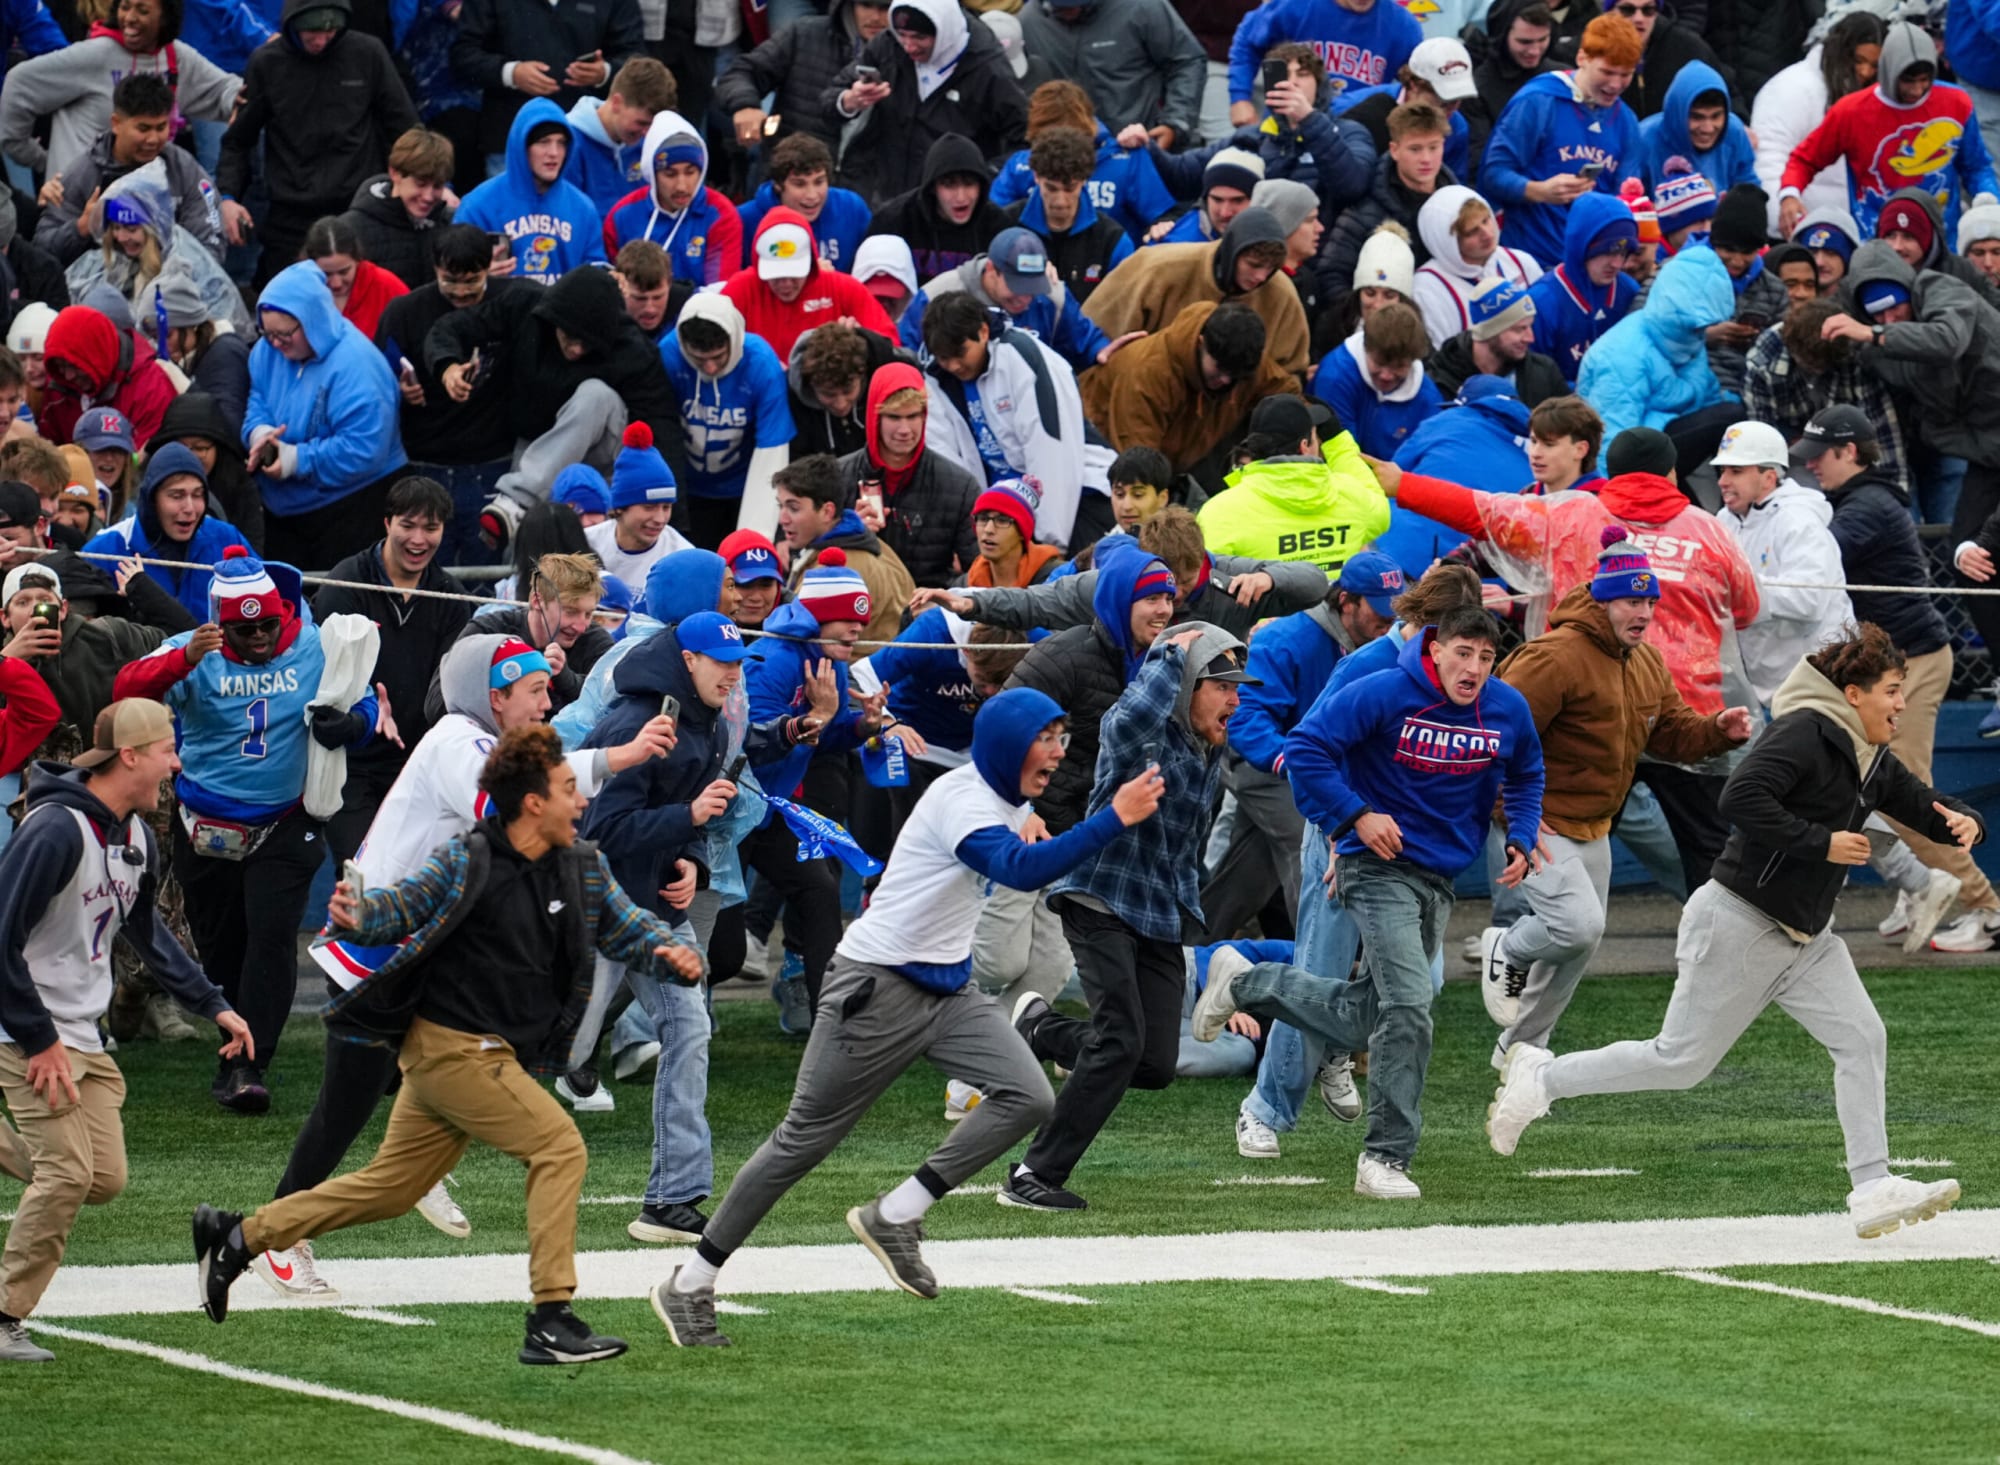 Kansas Football Fans Disappointed with Guaranteed Rate Bowl Location